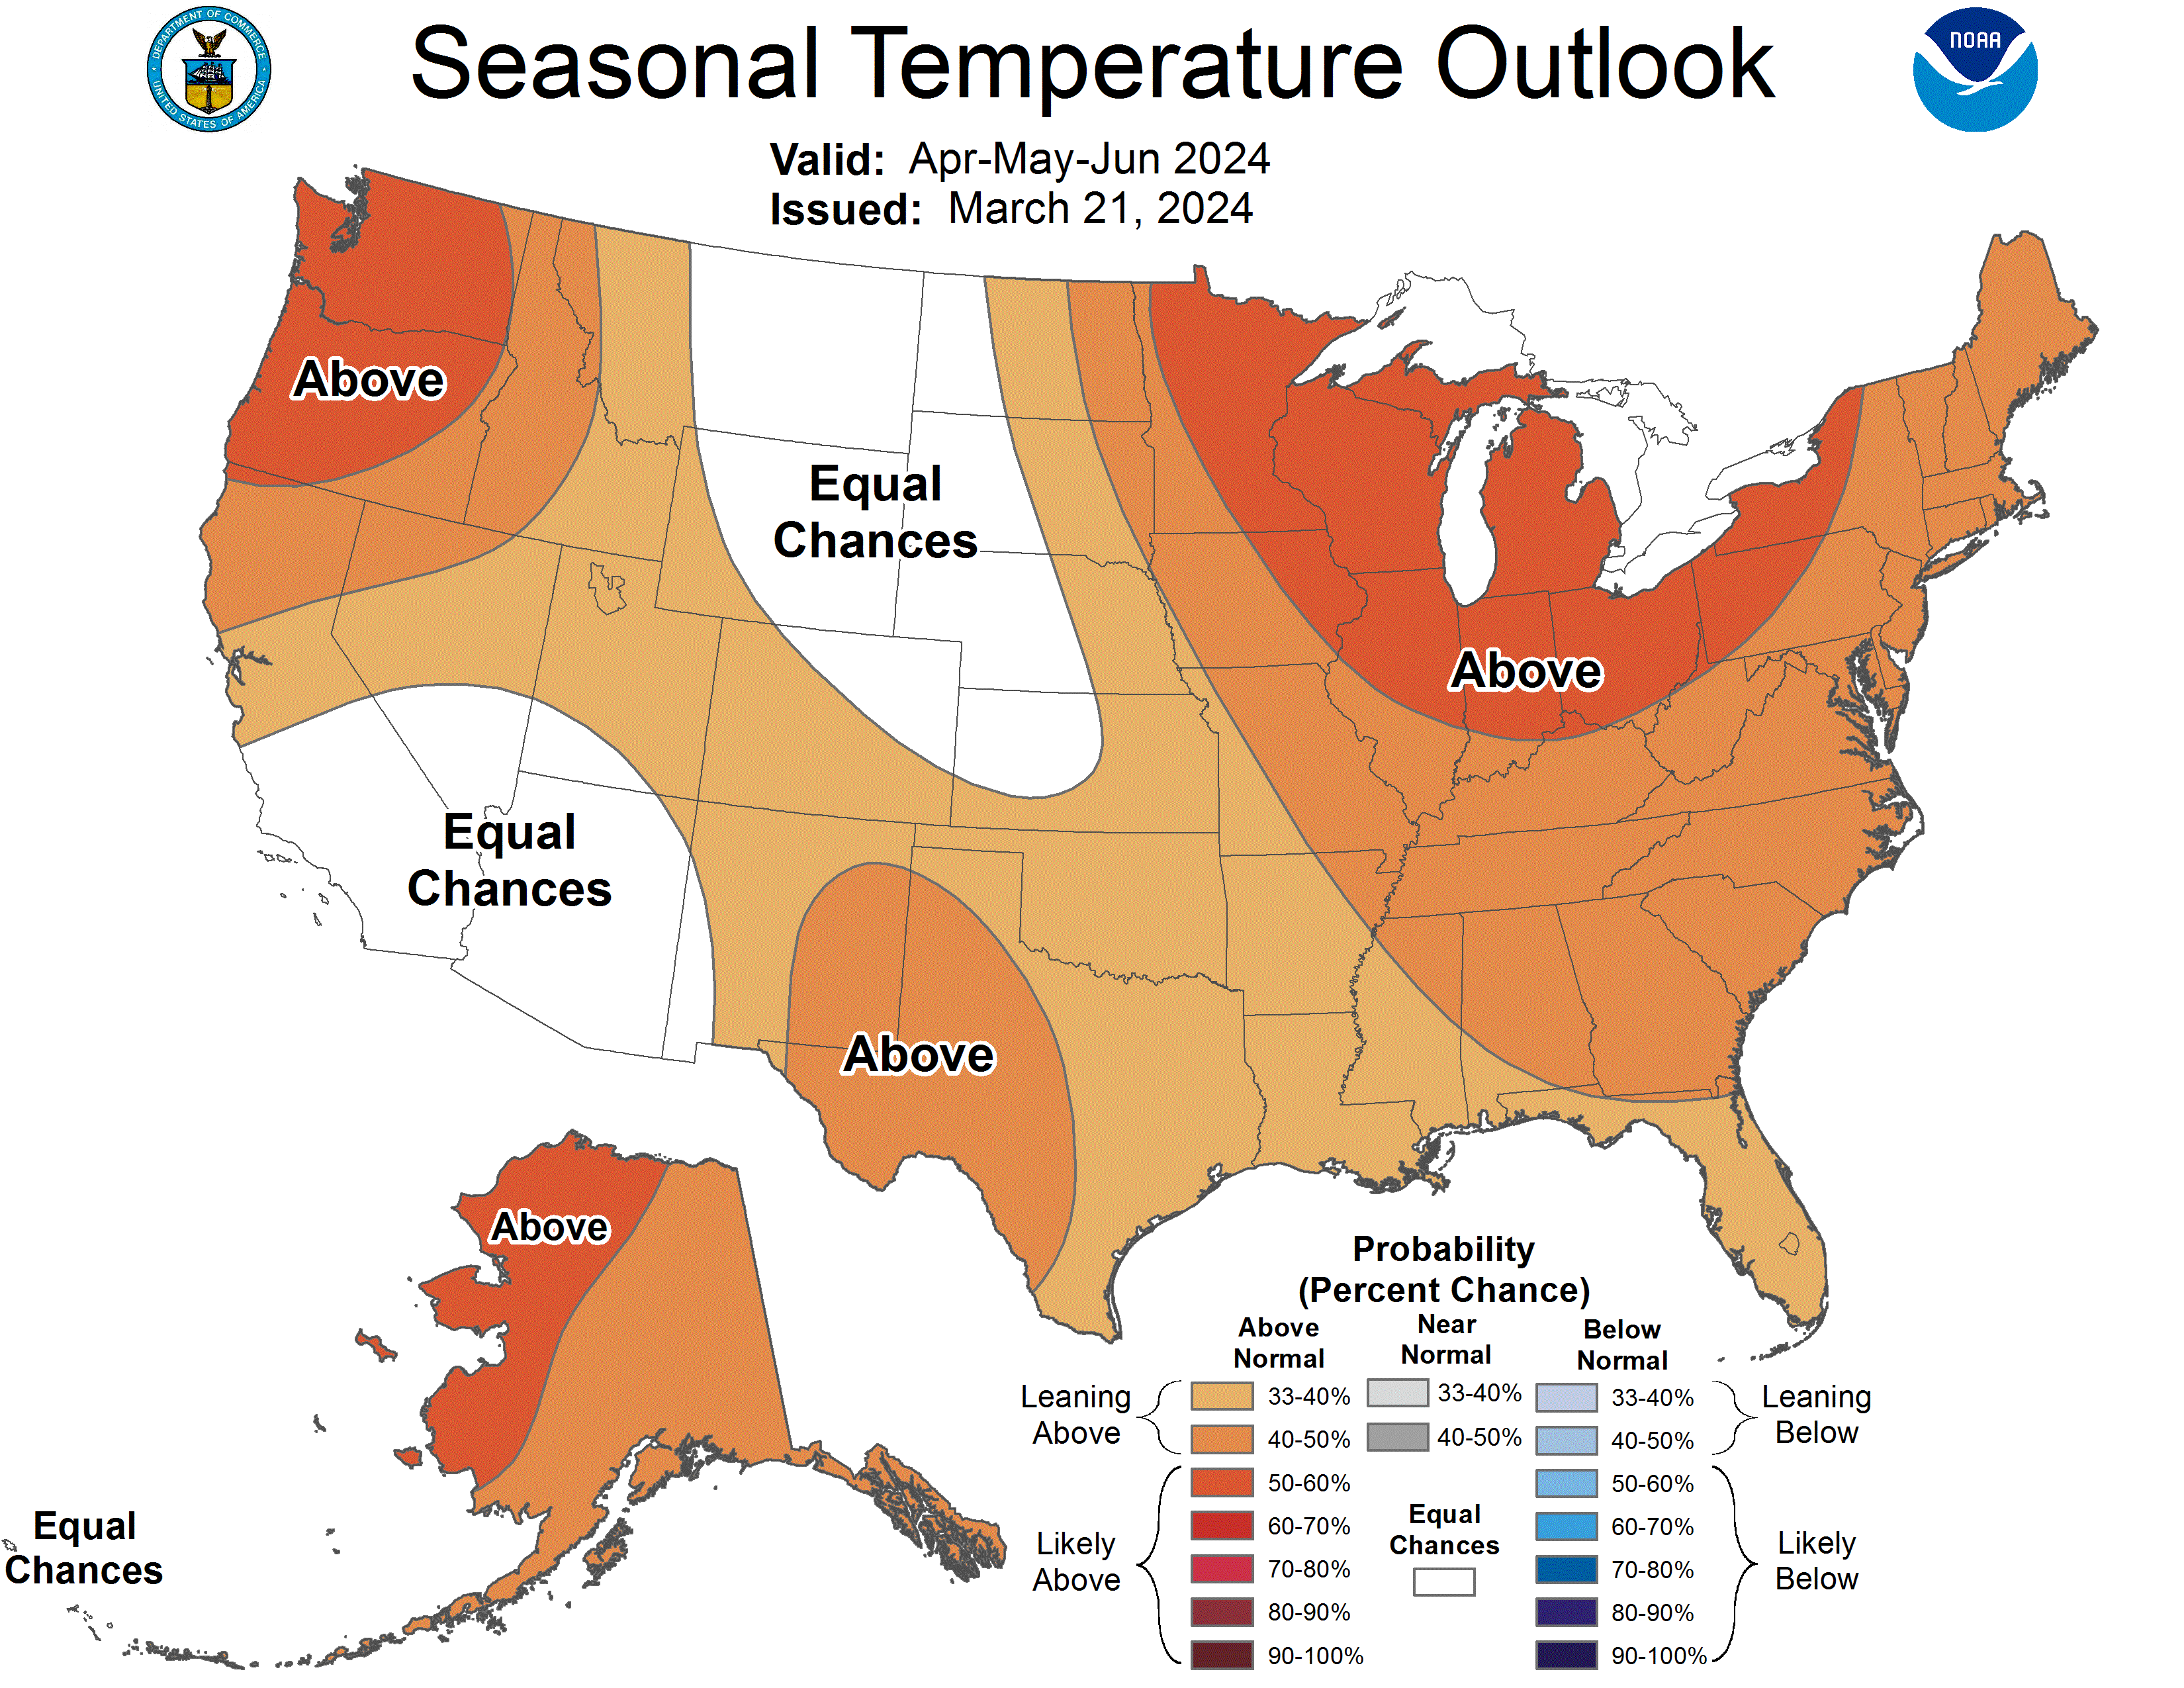 Map of the United States depicting the Season Temperature Outlook for April-June 2024 issues on March 21, 2024. 